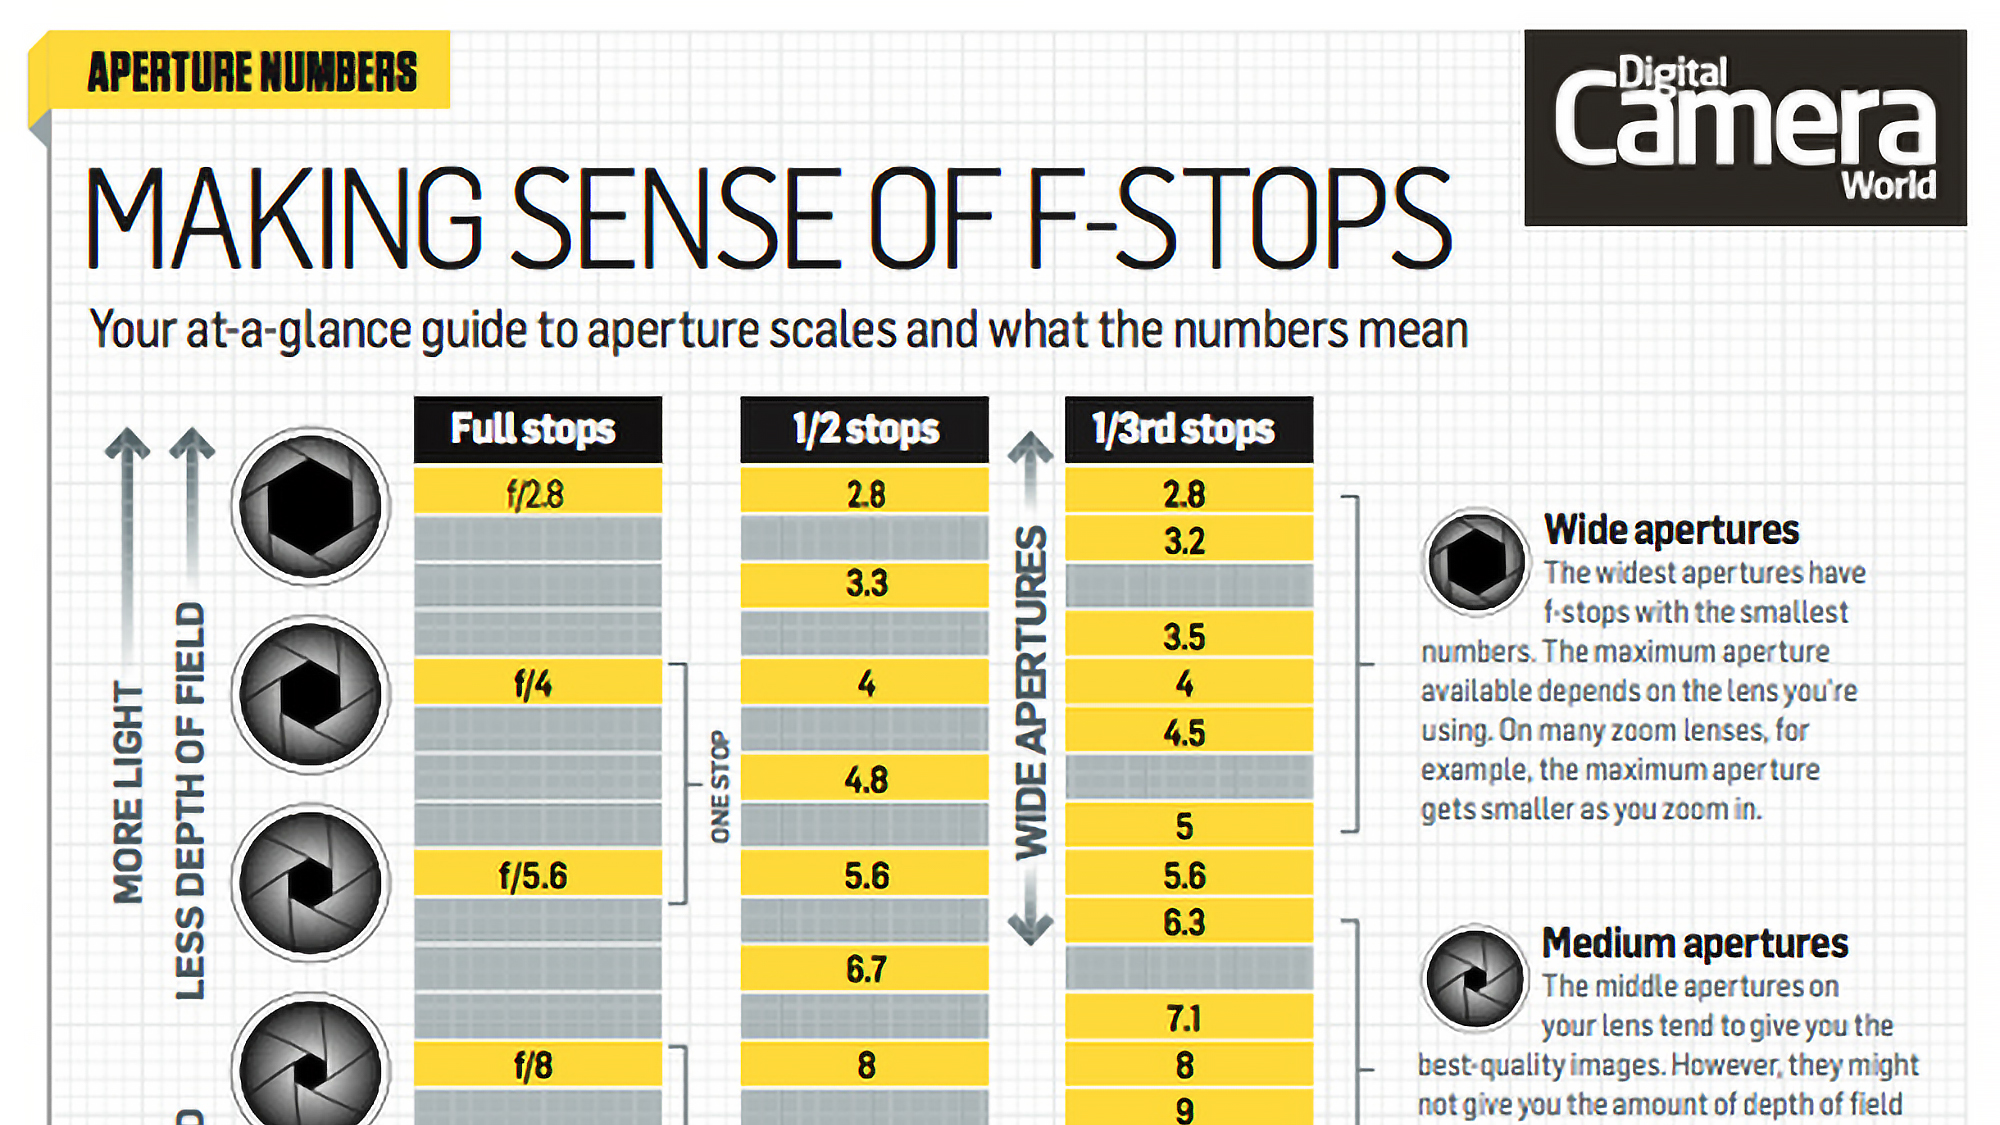 Understanding F-Stop Chart for Better Photography